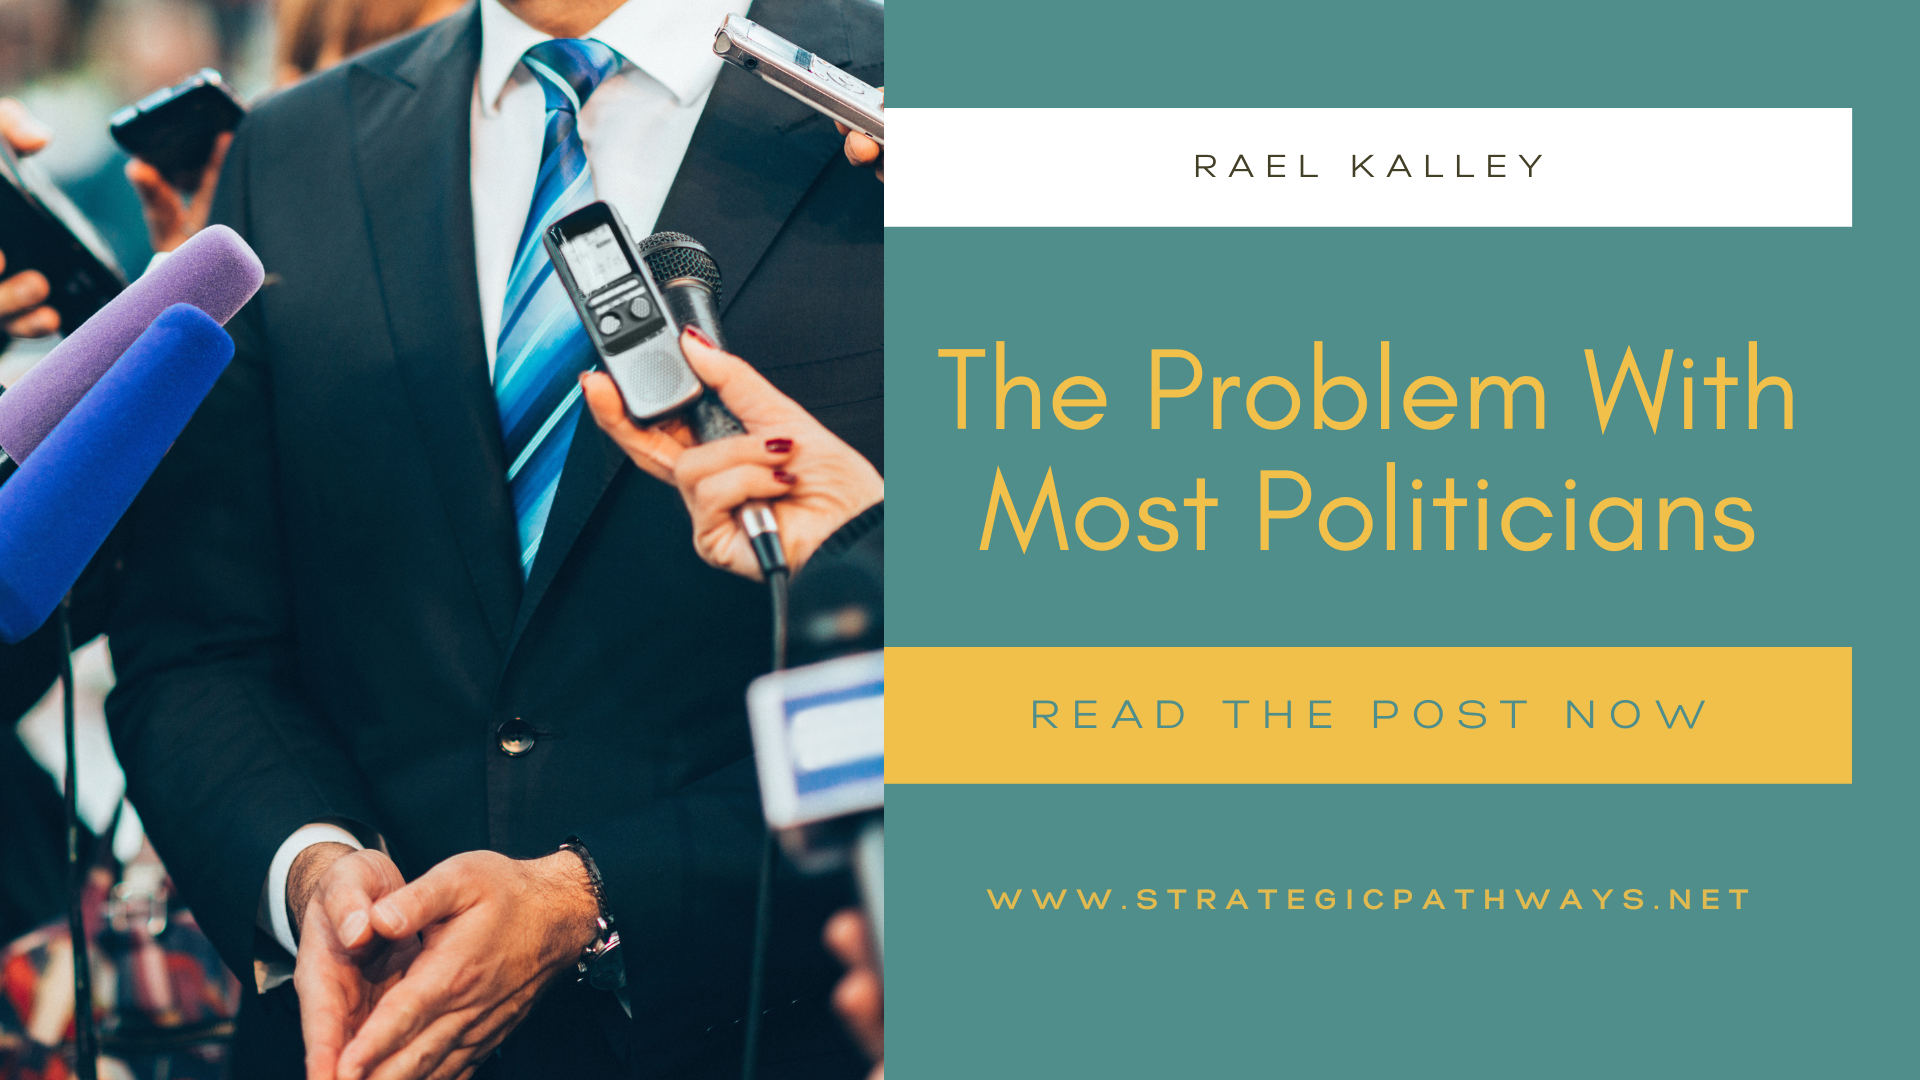 Text reading "The Problem With Most Politicians" and a man talking to reporters